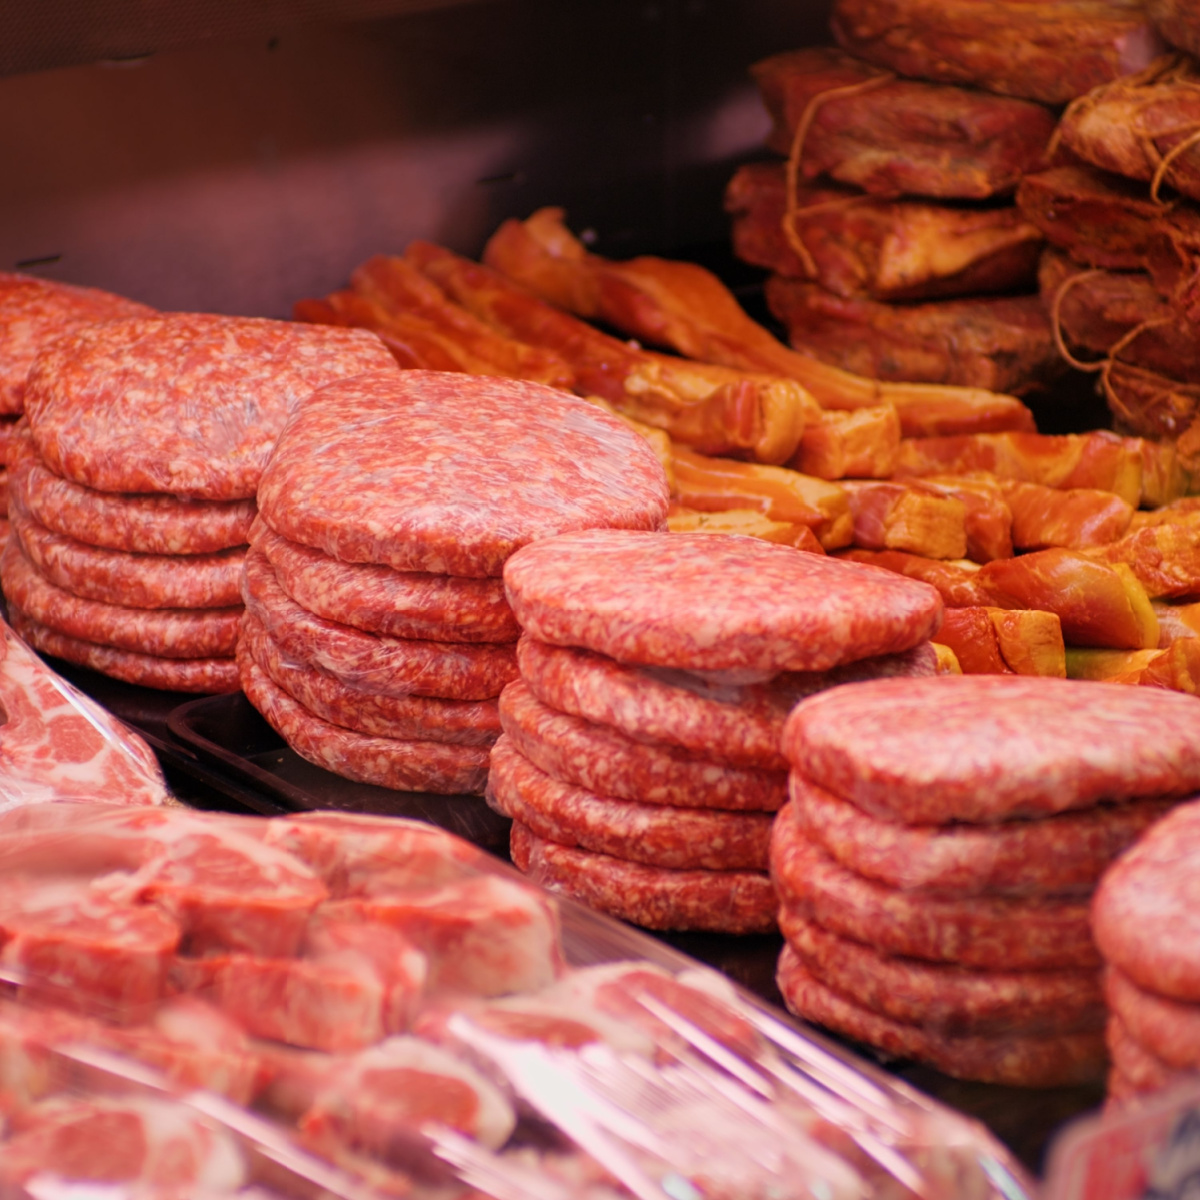 processed meats